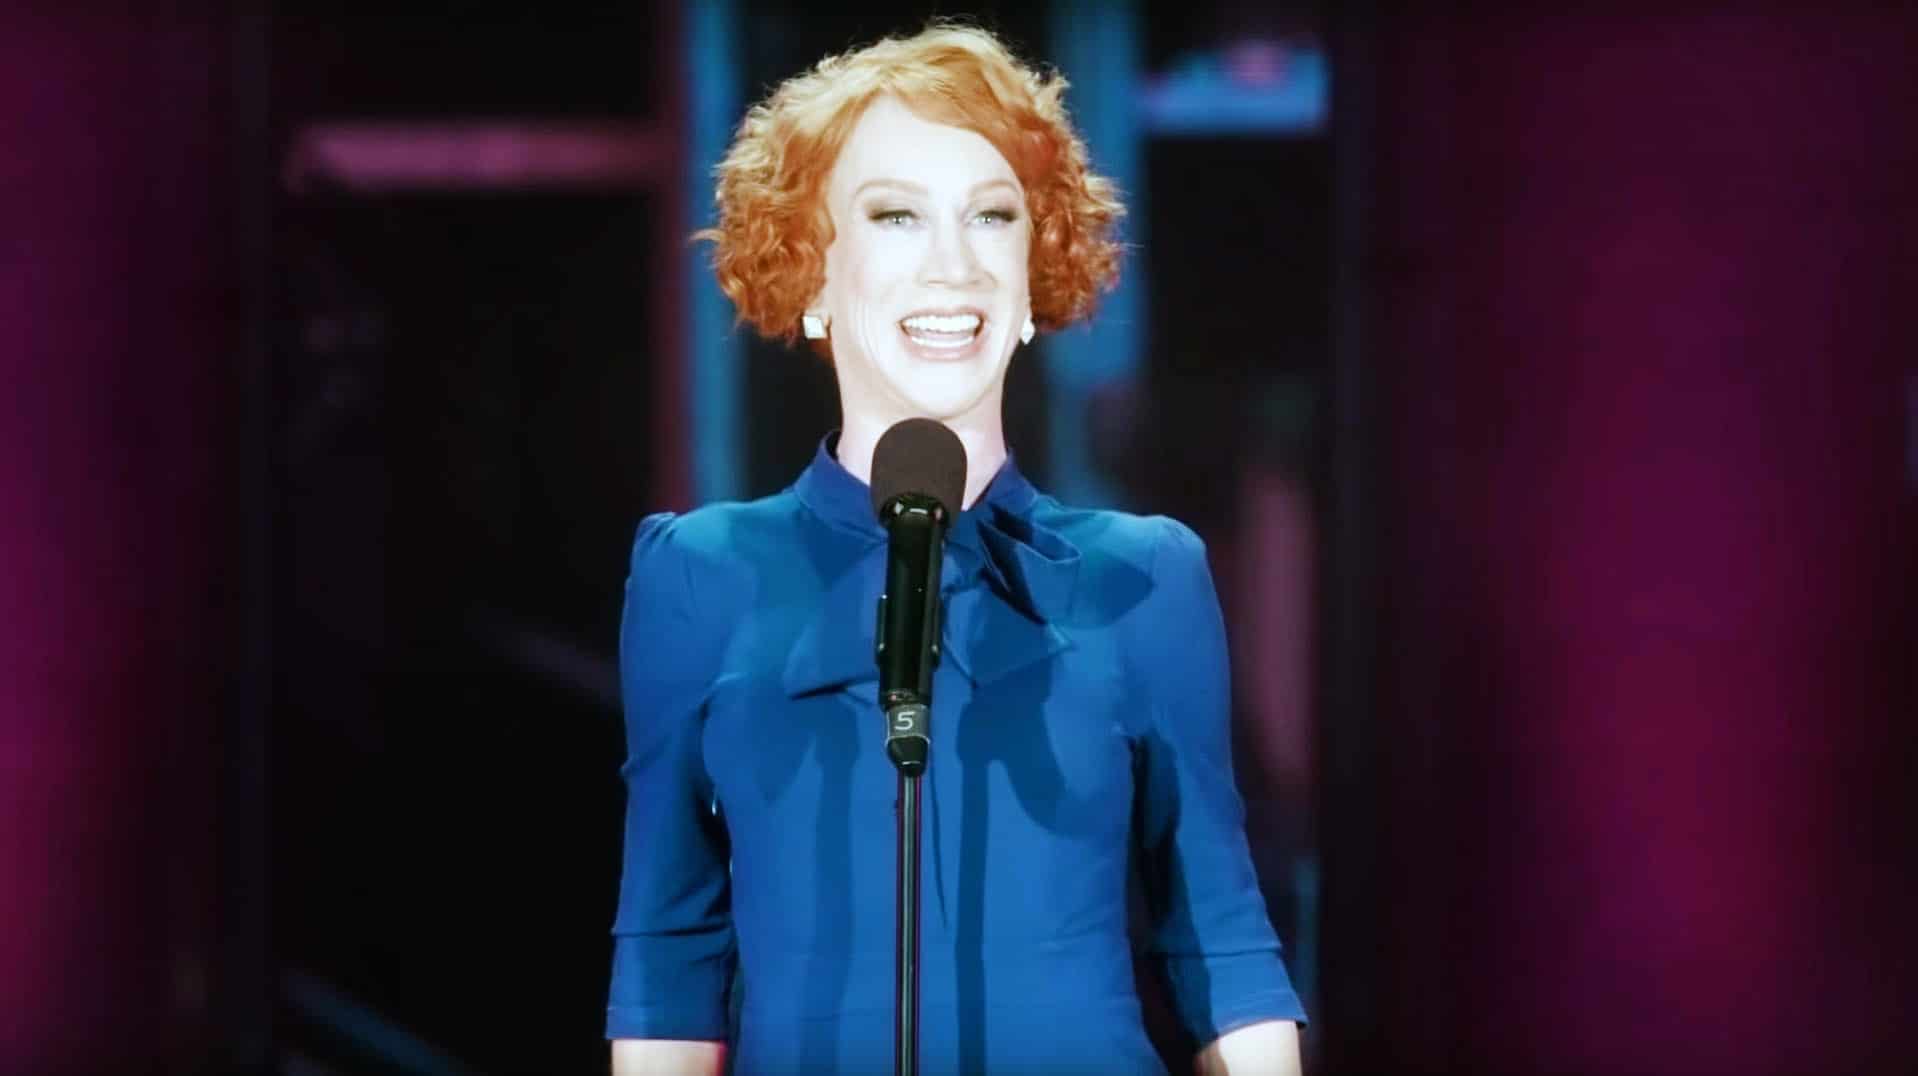 KATHY GRIFFIN: A HELL OF A STORY, Kathy Griffin, 2019